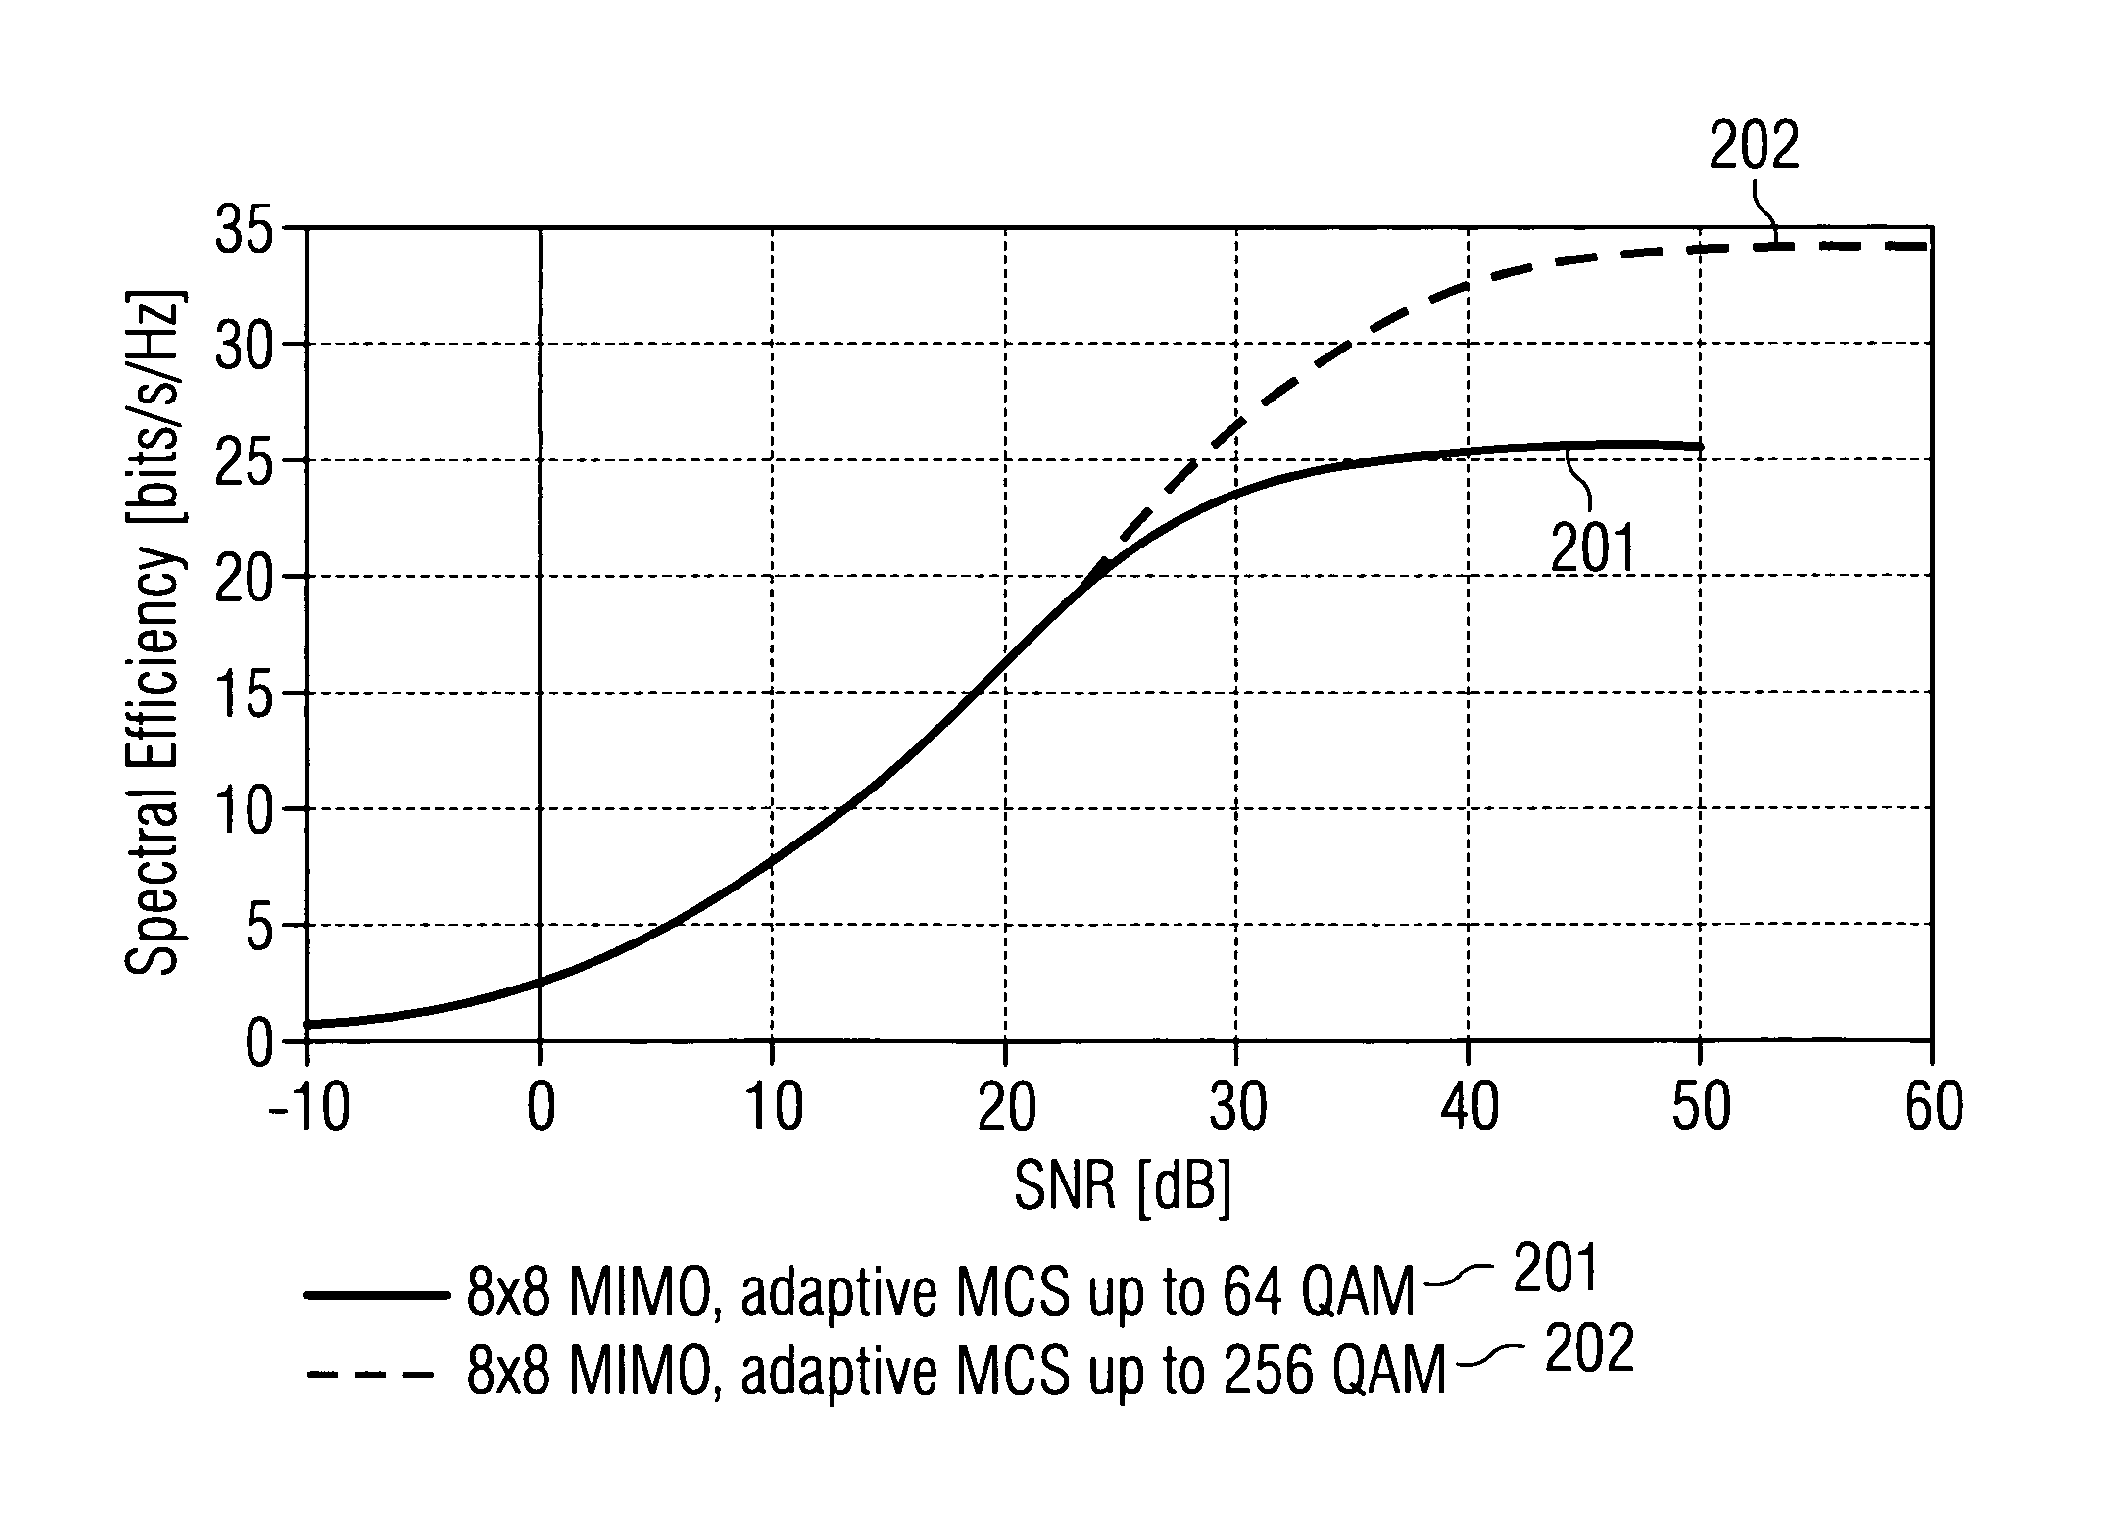 Controlling a Modulation and Coding Scheme for a Transmission Between a Base Station and a User Equipment